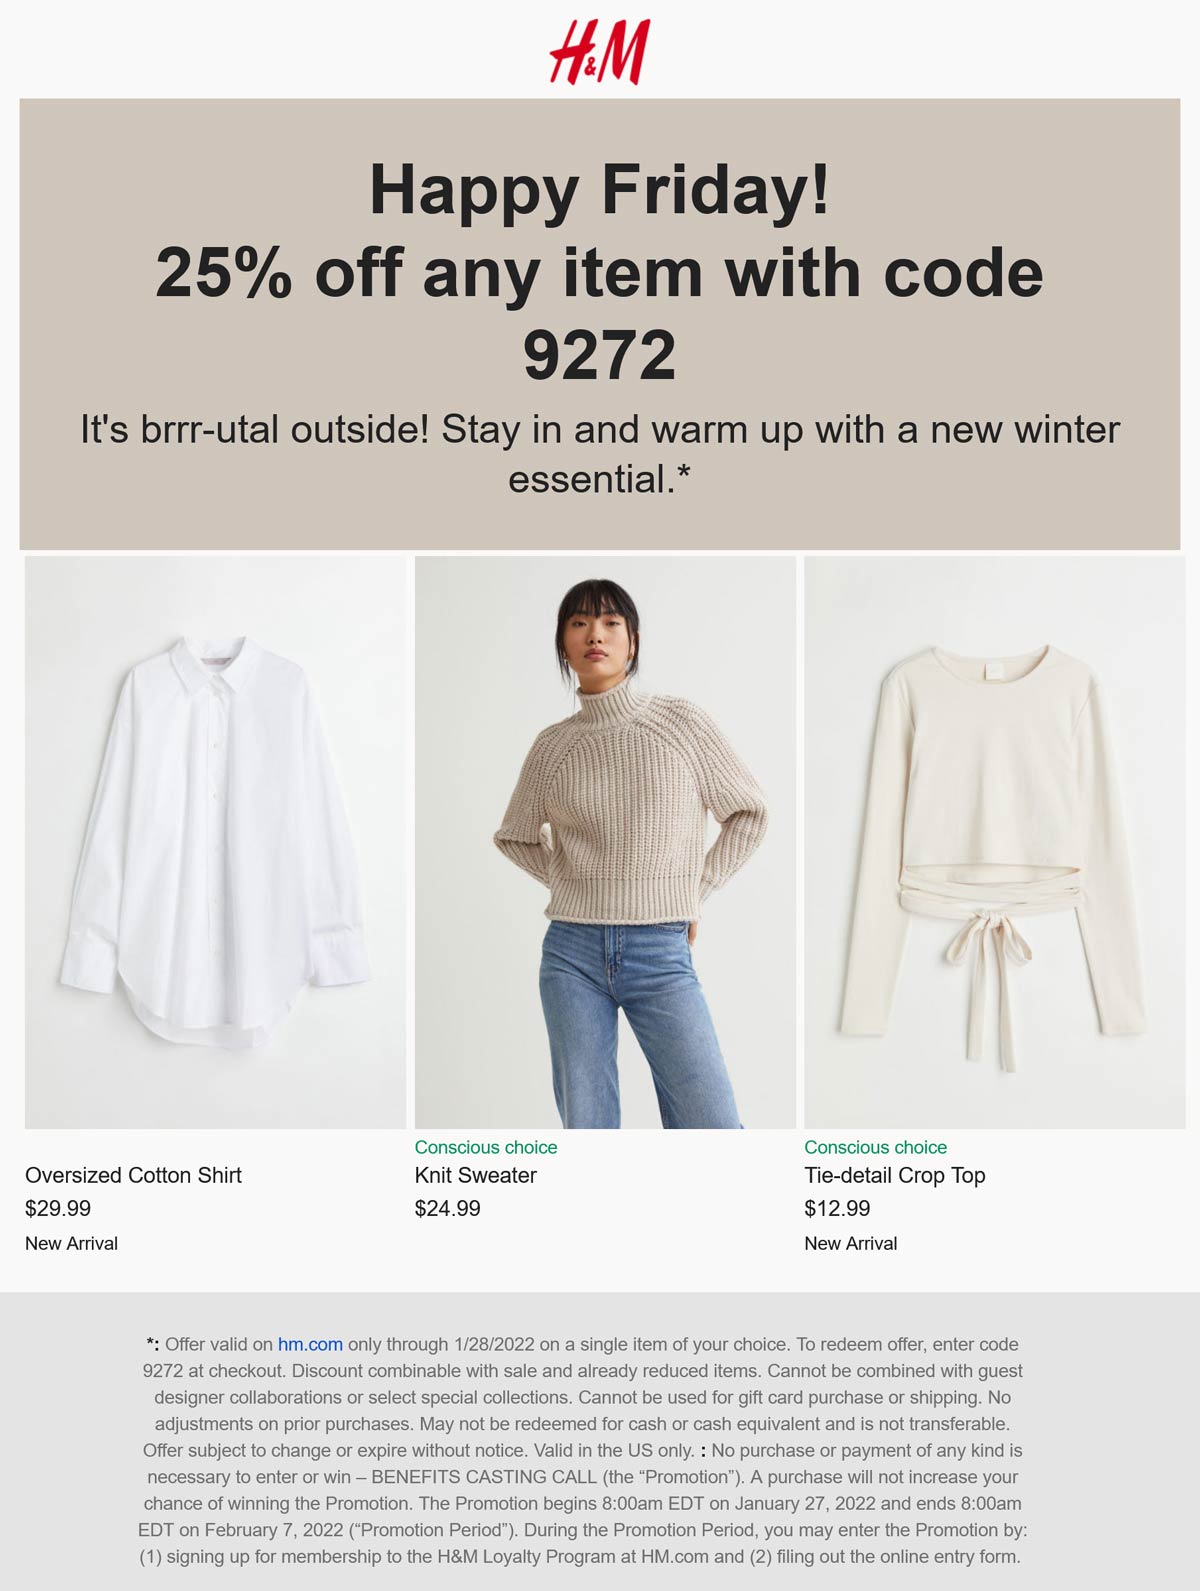 H&M stores Coupon  25% off any item today at H&M via promo code 9272 #hm 